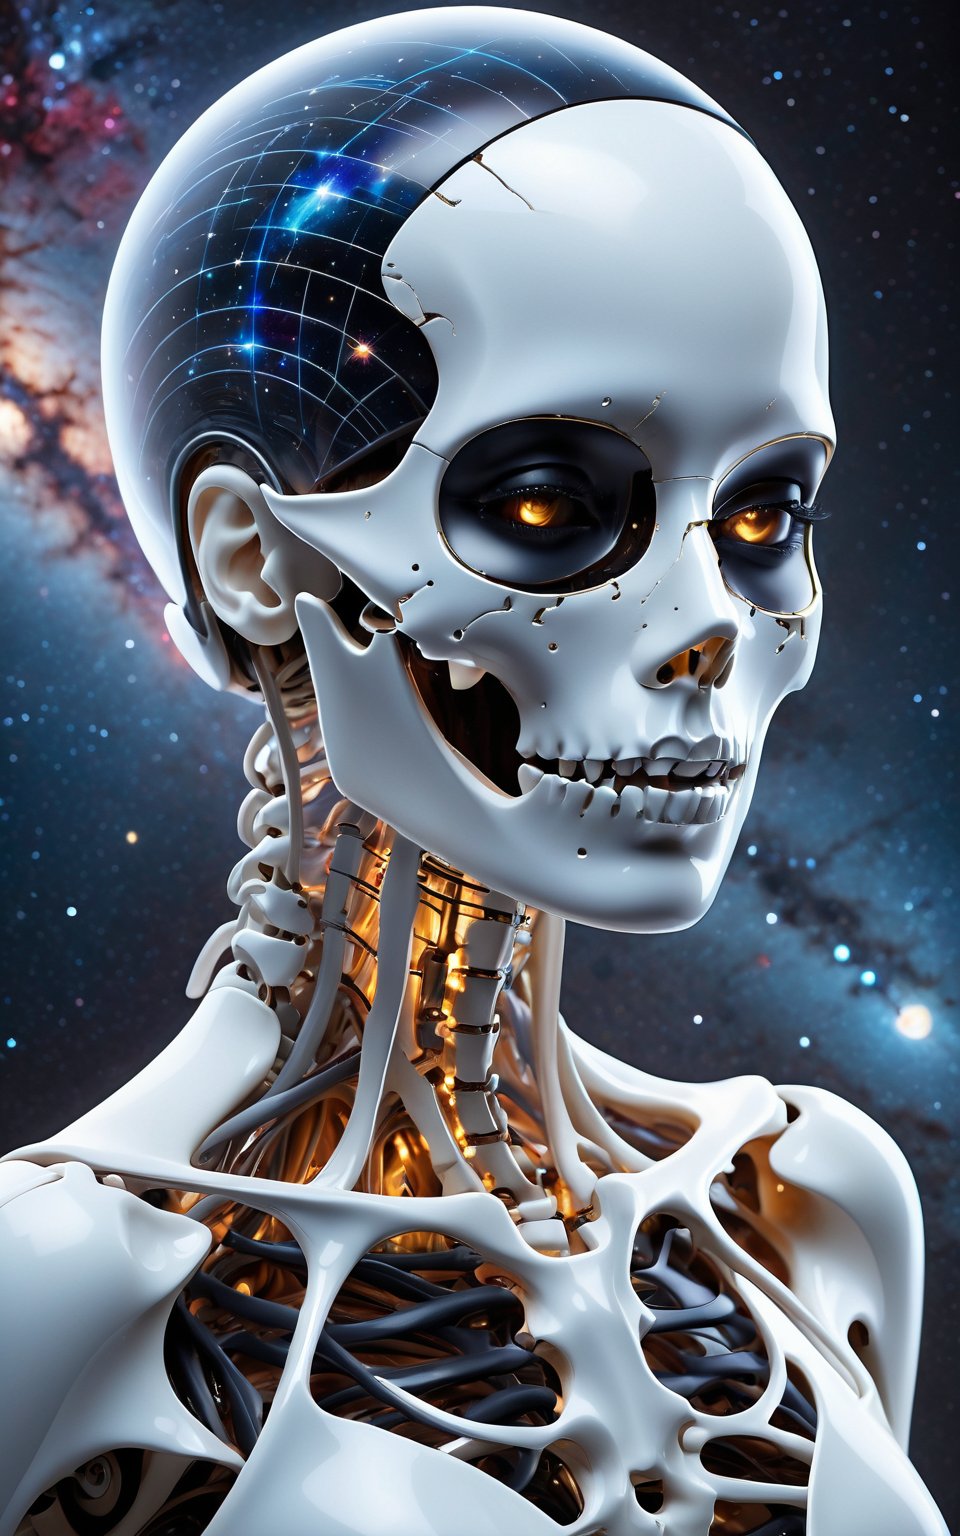 (best quality,8K,highres,masterpiece), ultra-detailed, featuring a woman with her face obscured by a grey square, set against a cosmic, star-filled background. The woman appears to be wearing or integrated with an intricate skeletal structure that is white and somewhat luminescent. The cosmic backdrop bathes the scene in a mesmerizing array of stars and galaxies, creating a sense of vastness and wonder. The obscured face adds an air of mystery and intrigue, inviting viewers to ponder the hidden depths of the character's identity. Meanwhile, the intricate skeletal structure adds a touch of ethereal beauty and symbolism, hinting at themes of mortality, transformation, and the interconnectedness of all things. This artwork is a captivating exploration of the human form amidst the cosmic expanse, blending elements of mystery, beauty, and cosmic wonder<lora:Detail_Enhancer_v1.5:2>